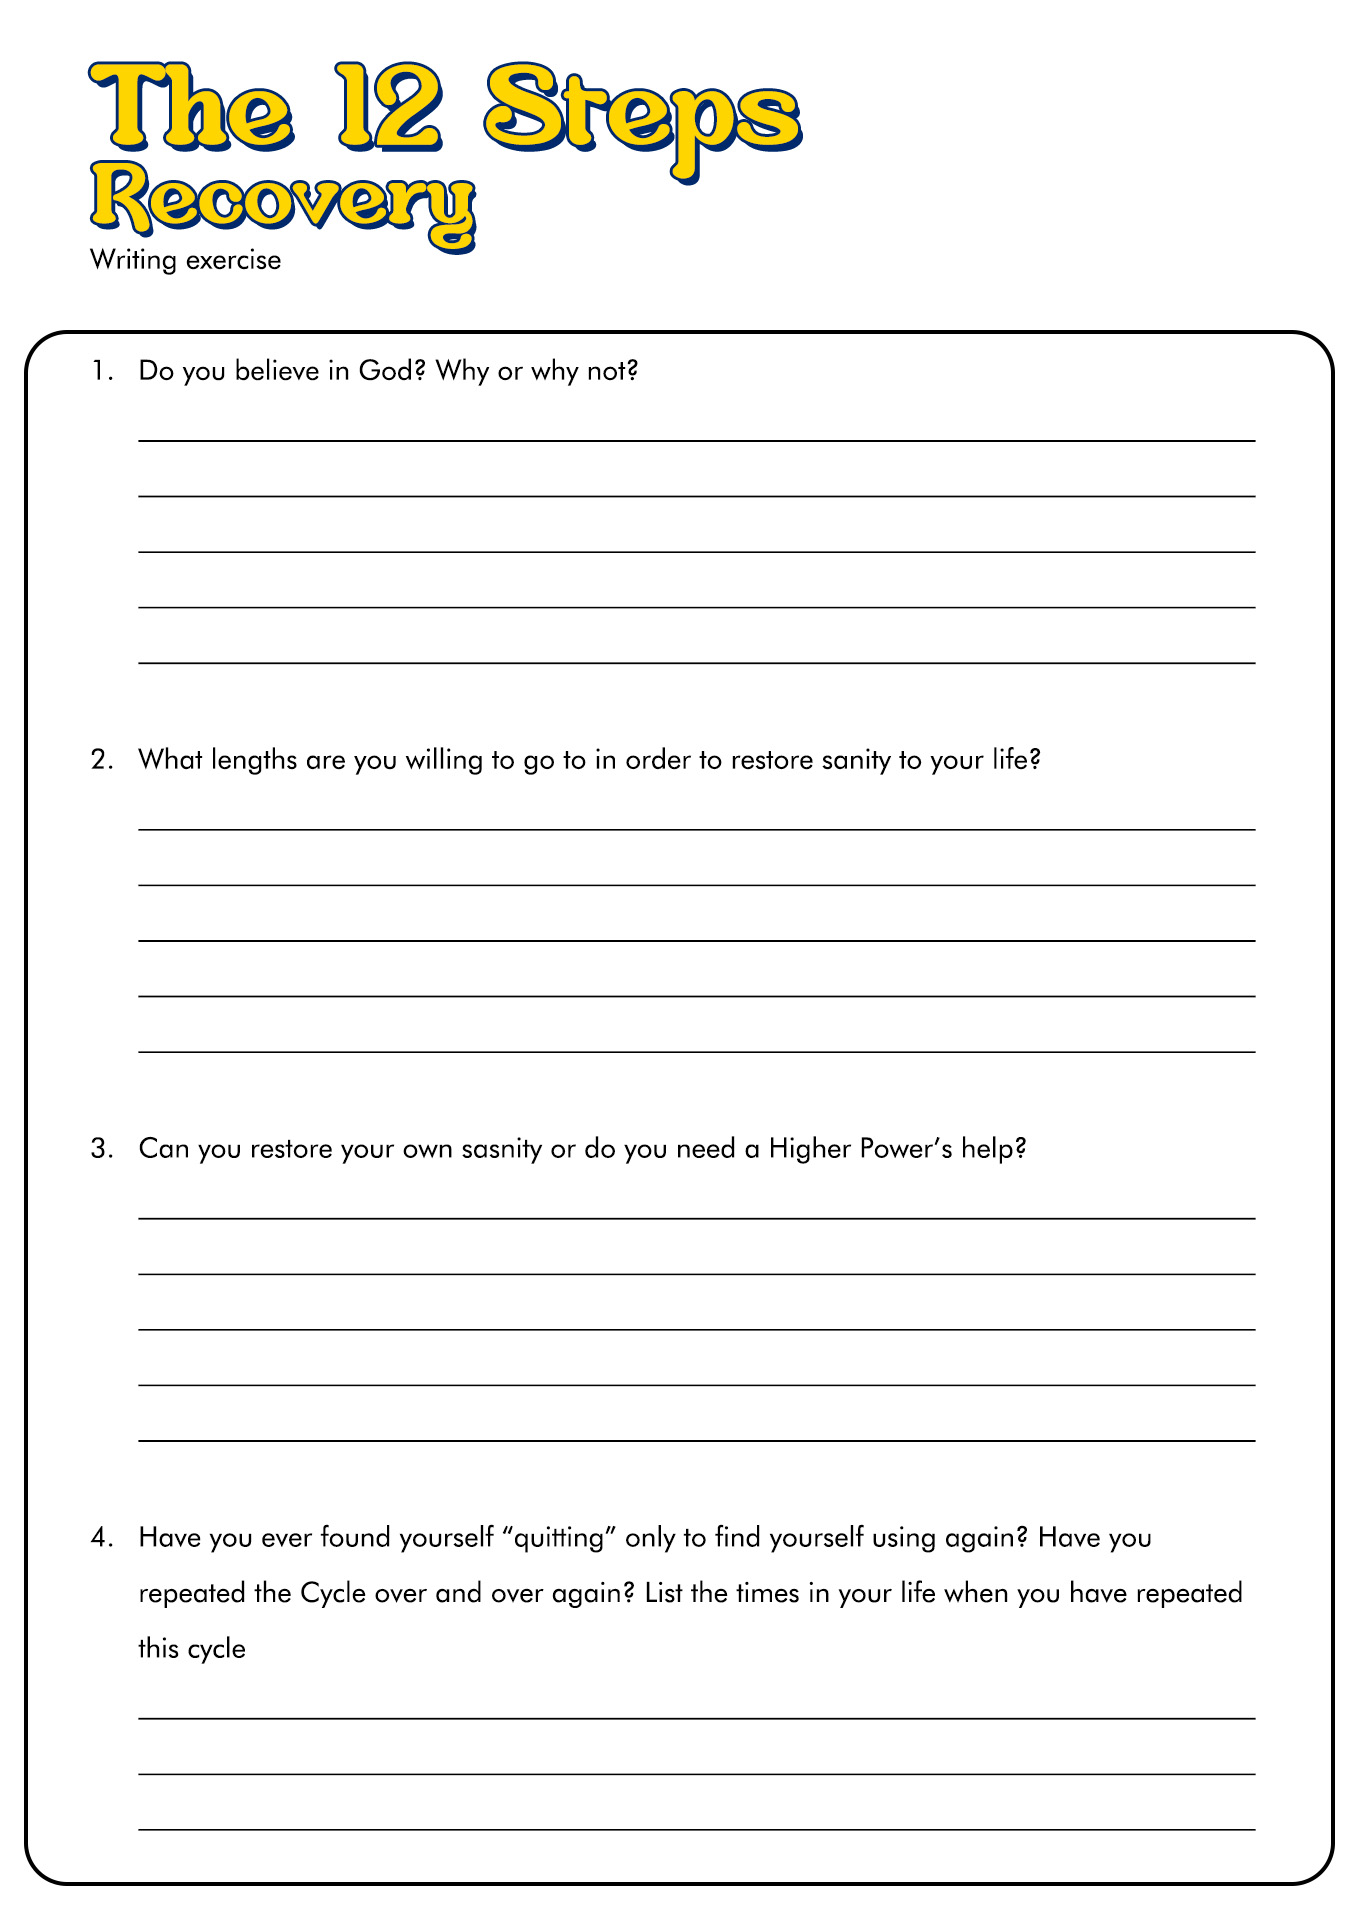 15-best-images-of-12-step-recovery-worksheets-narcotics-anonymous-12-step-worksheets-dual